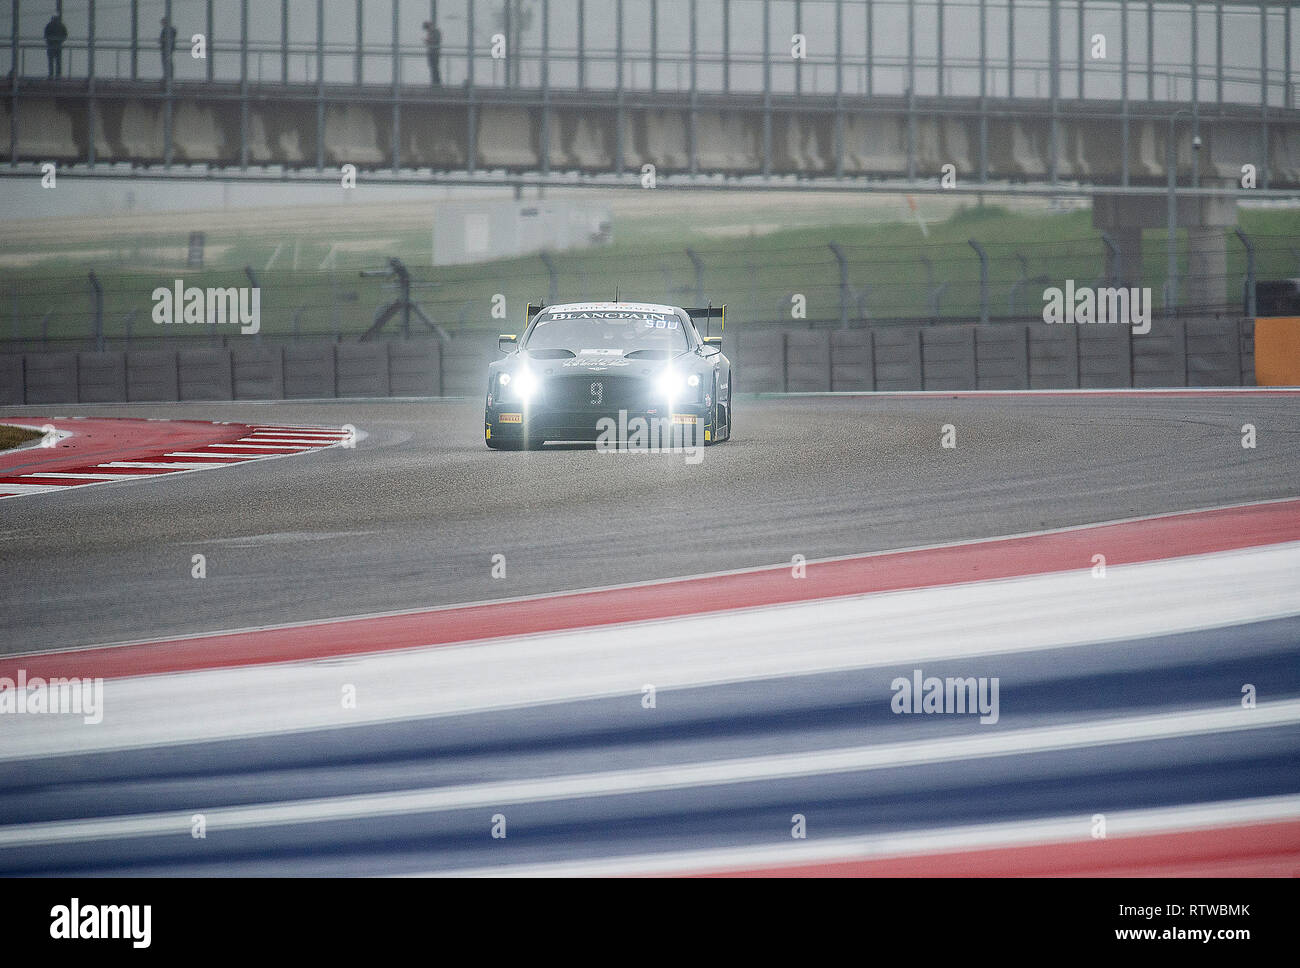 Austin, Texas, USA. 02nd Mar, 2019. Andy Soucek Driver 2 #09 Bentley Continental GT3 with K-PAX Racing in action GT SprintX - Pro at the Blancpain GT World Challenge, Circuit of The Americas in Austin, Texas. Mario Cantu/CSM/Alamy Live News Stock Photo